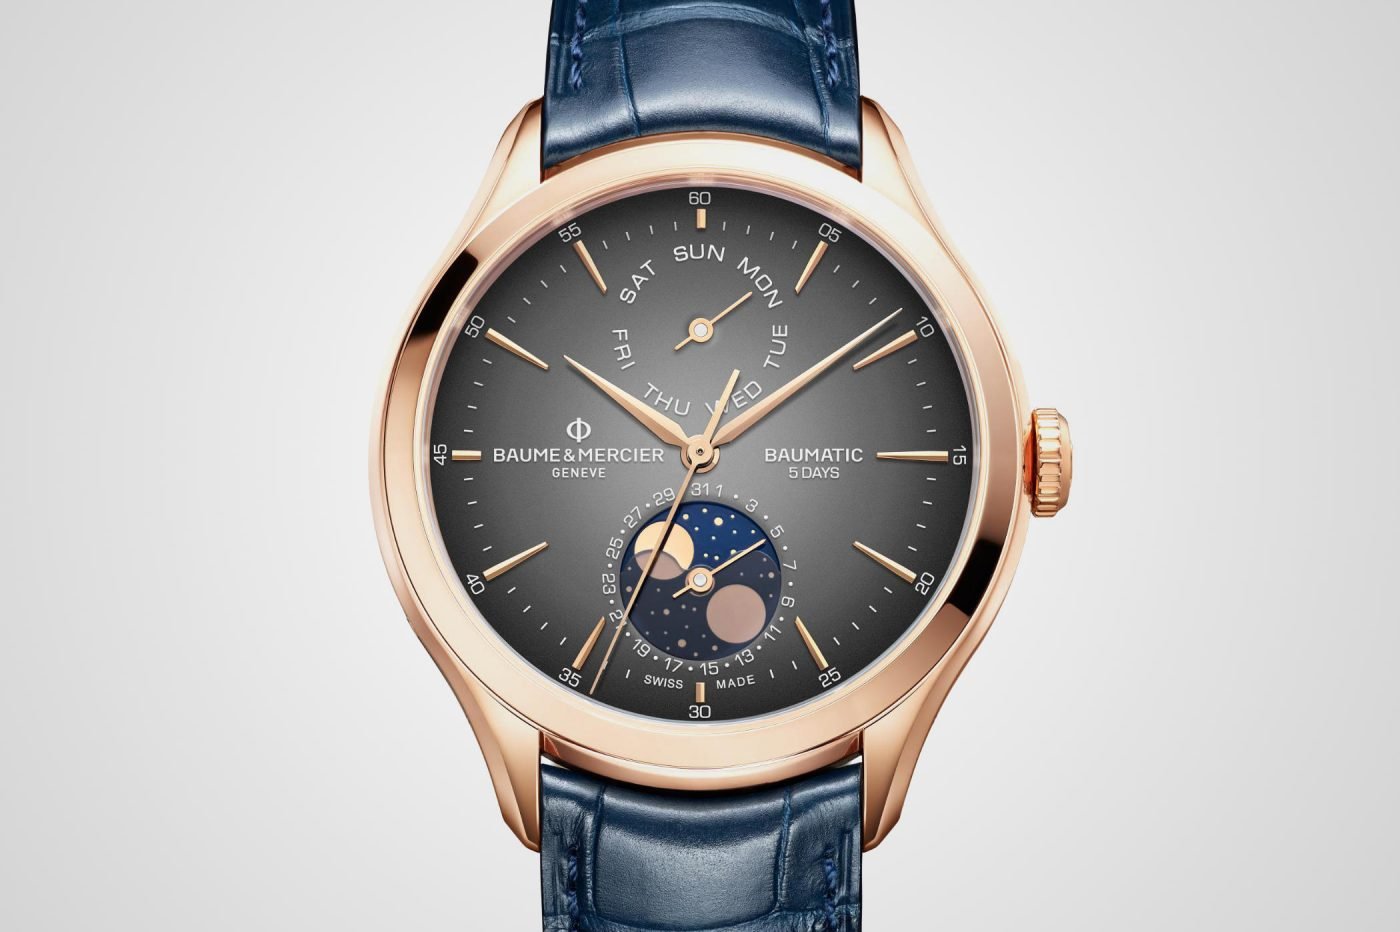 Baume & Mercier Clifton Baumatic Day-date Moon Phase